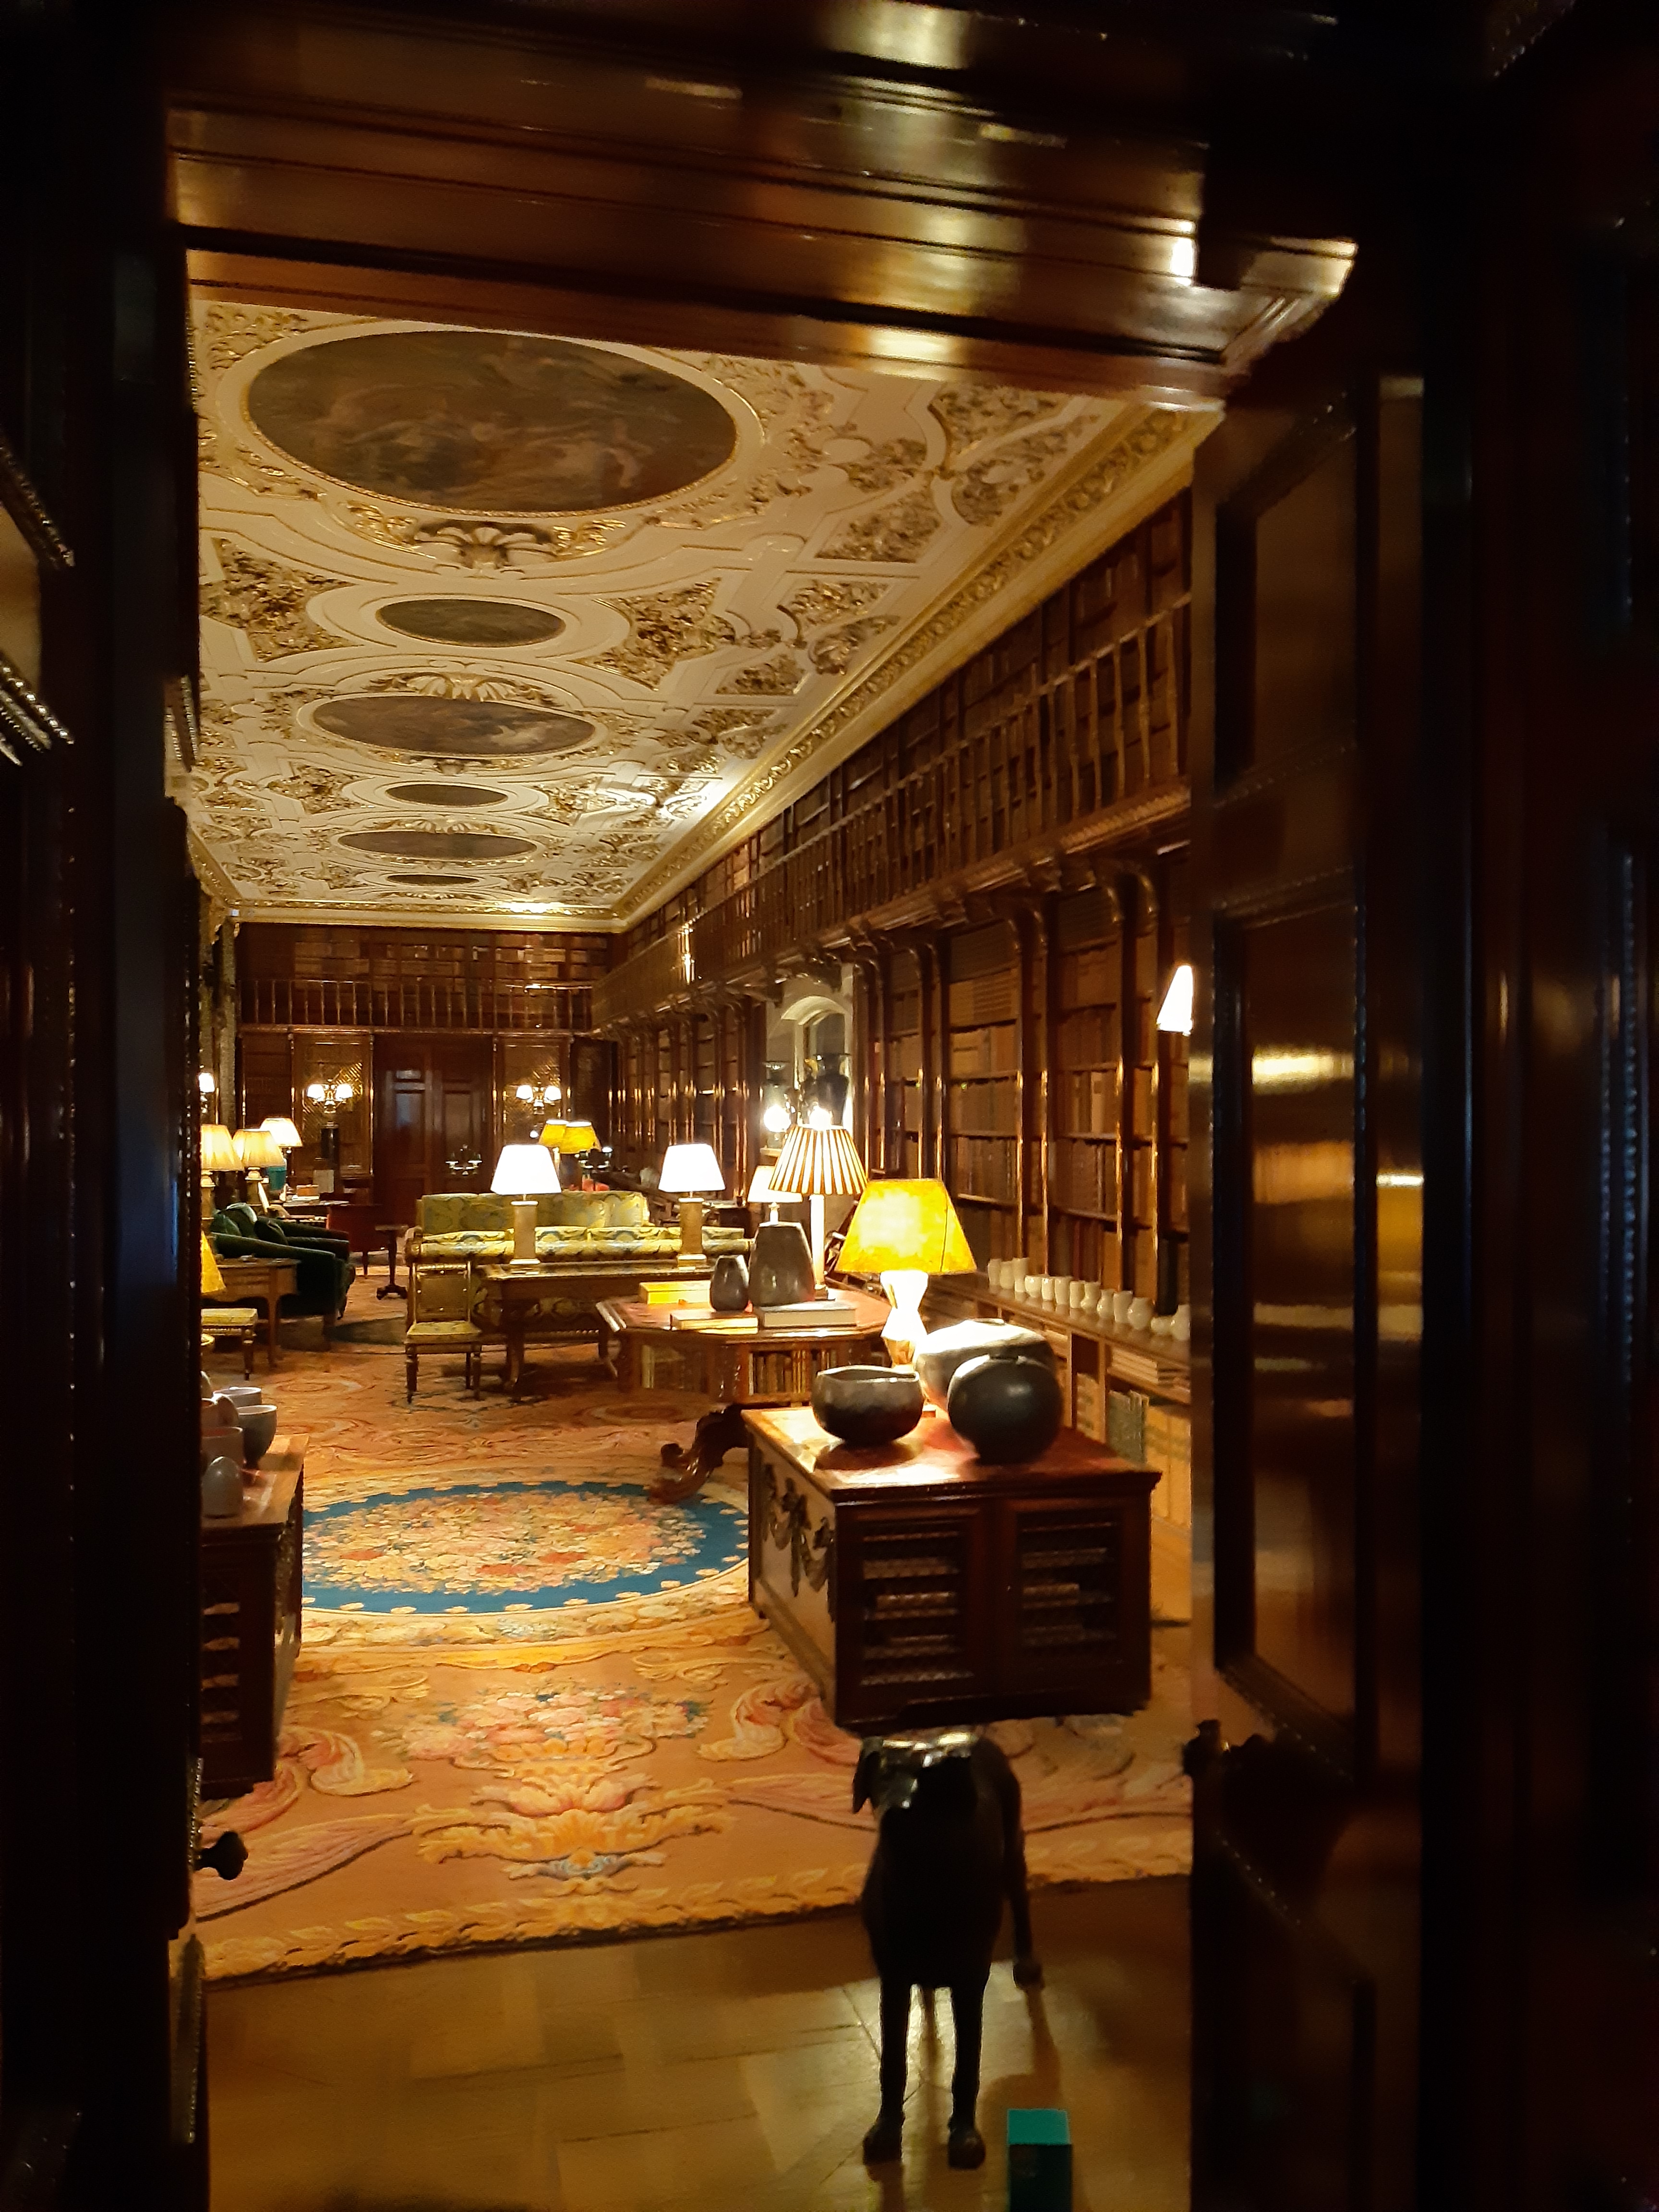 Library in Chatsworth House